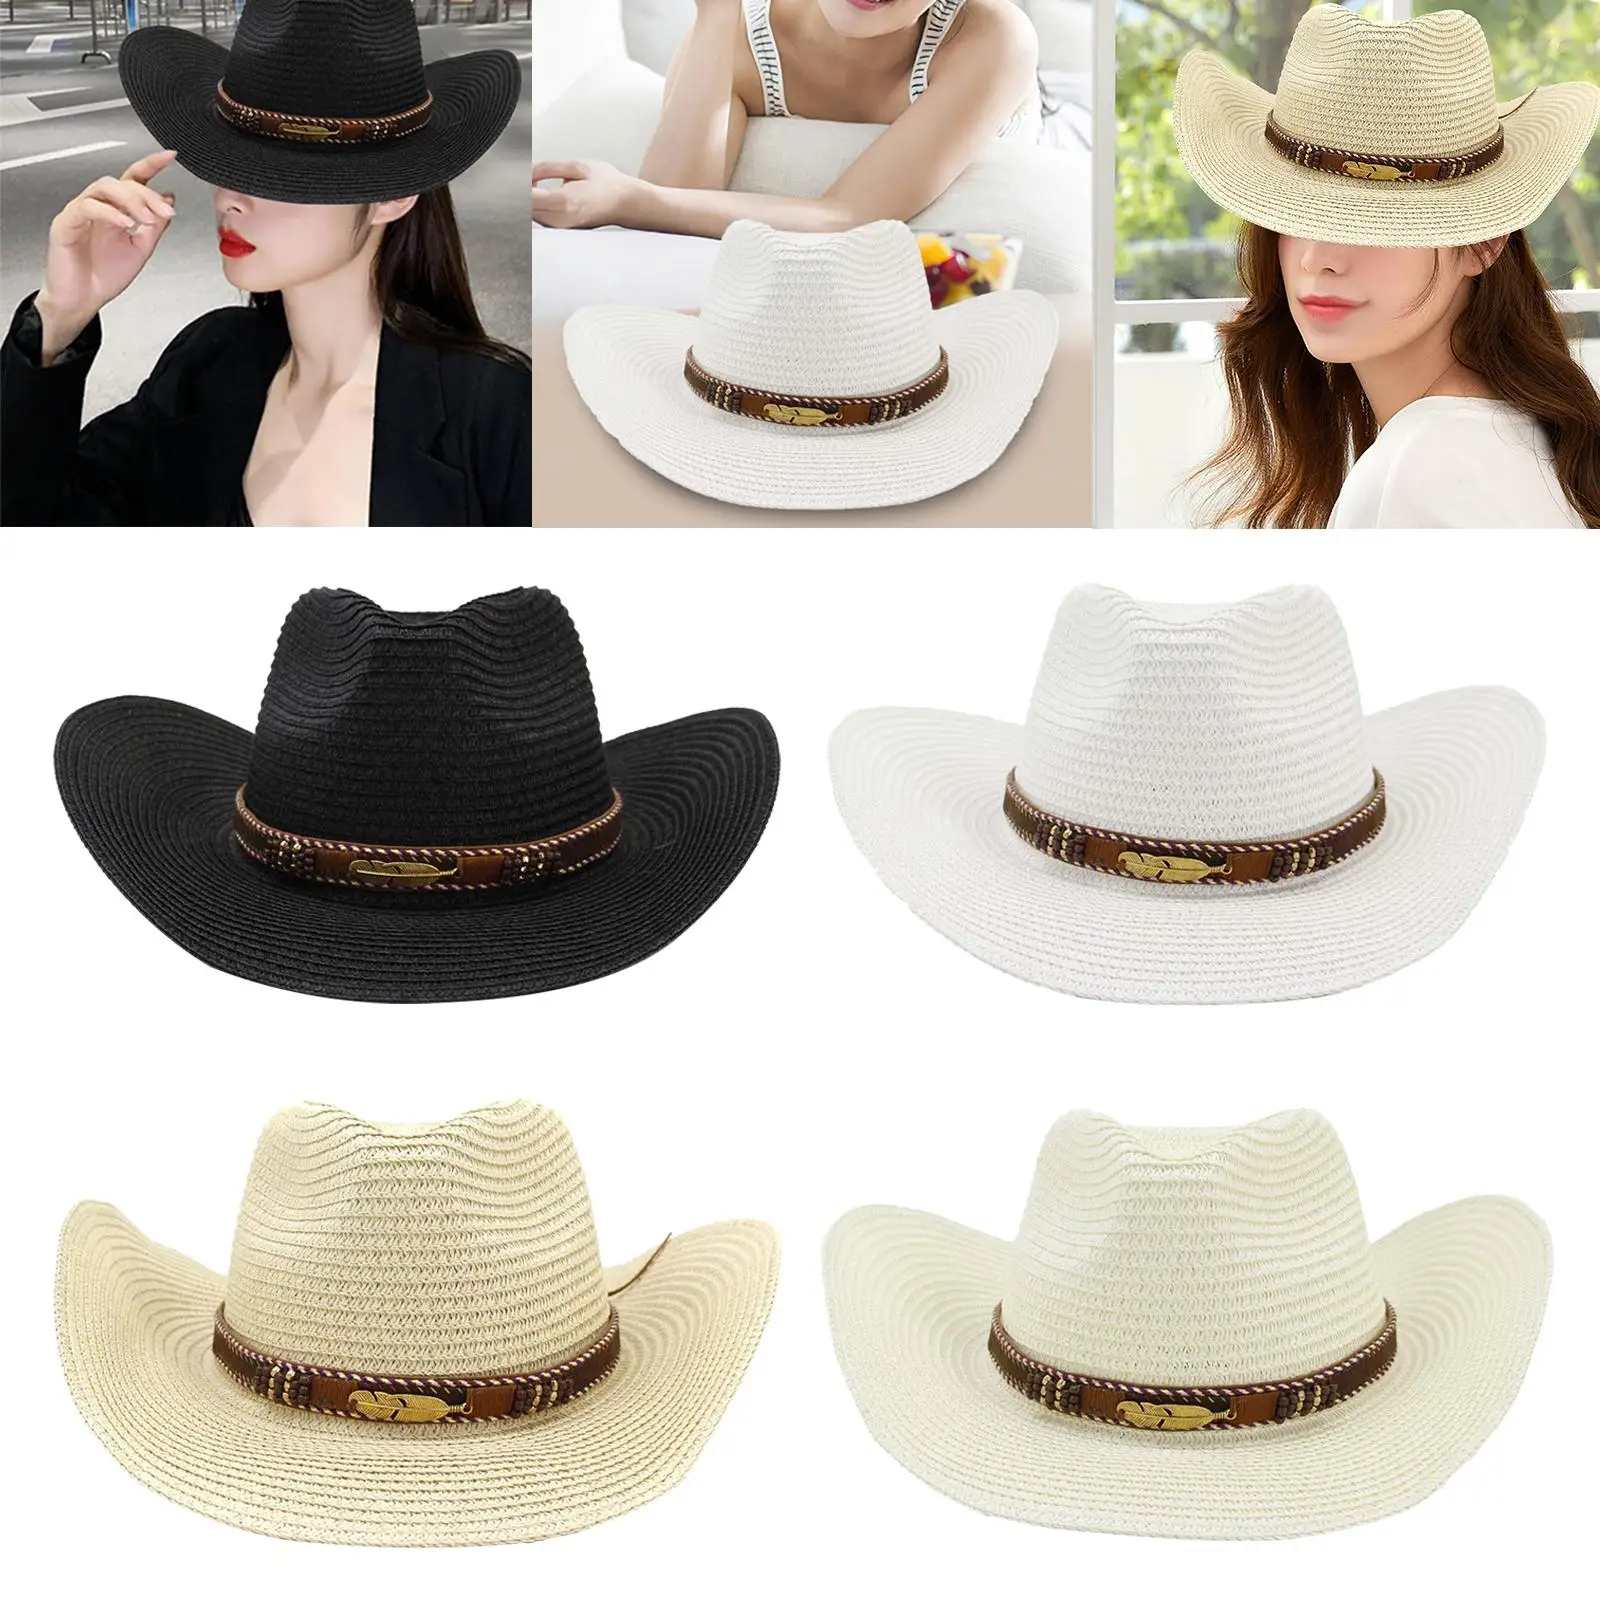 Western Style Women Hats Sunscreen Hat Couple Hat Cowboy Hat for Summer Women Men Horseback Riding Costume Clothes Accessories